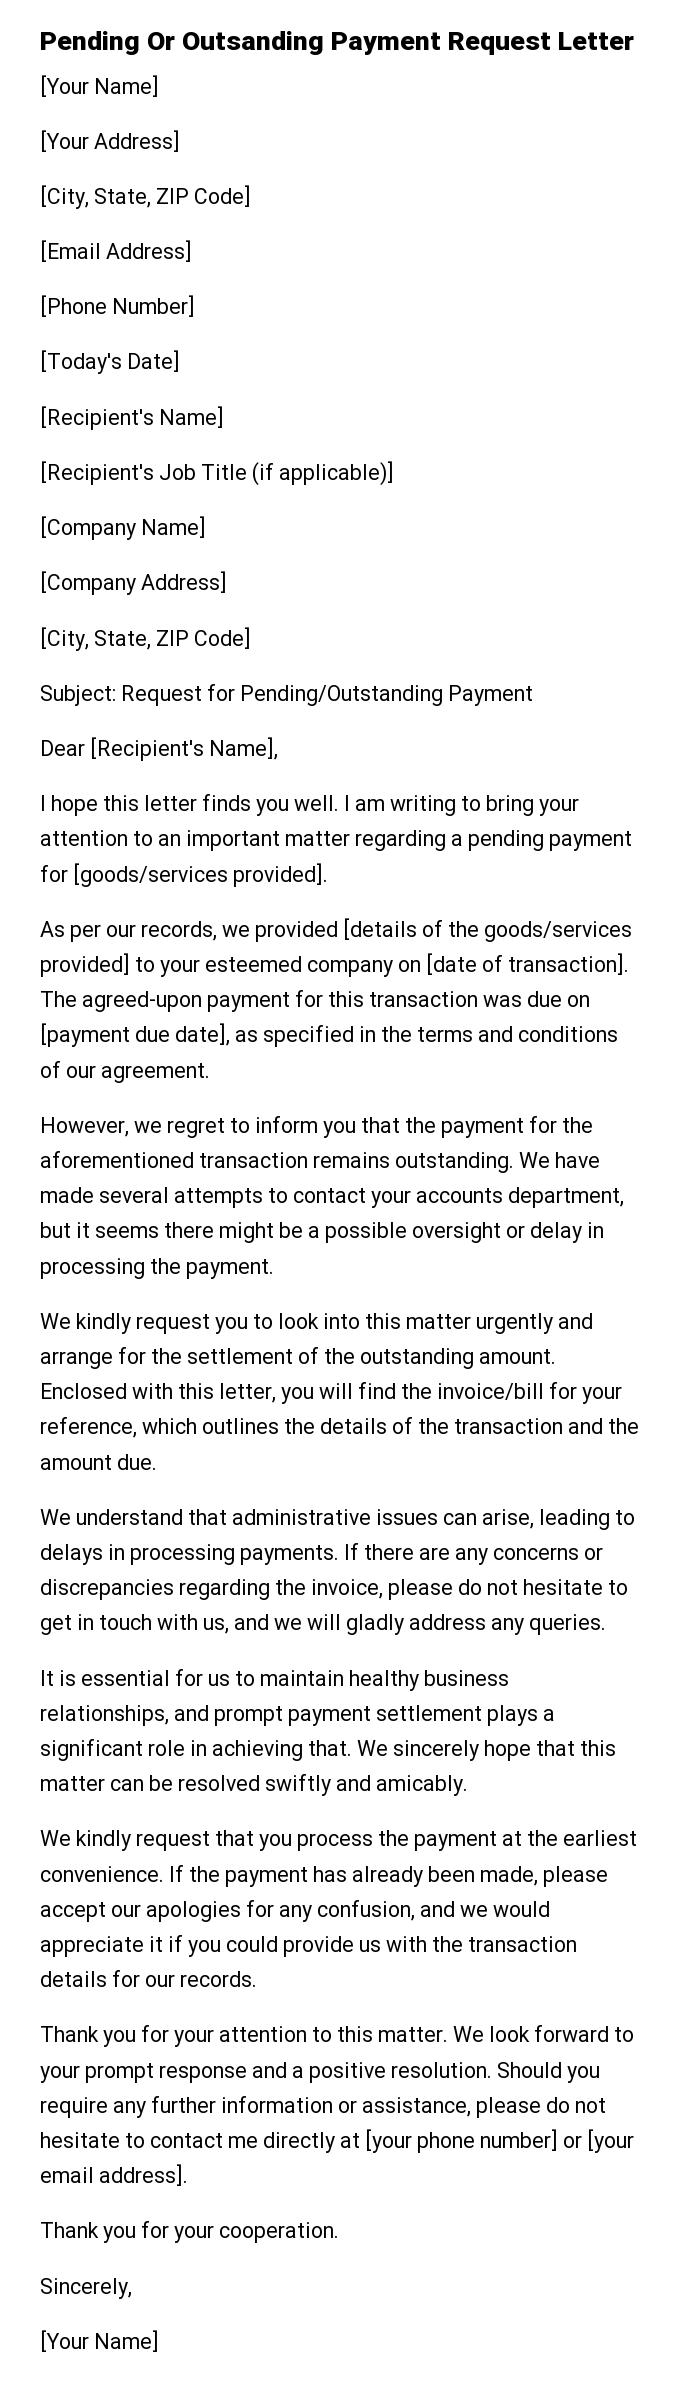 Pending Or Outsanding Payment Request Letter